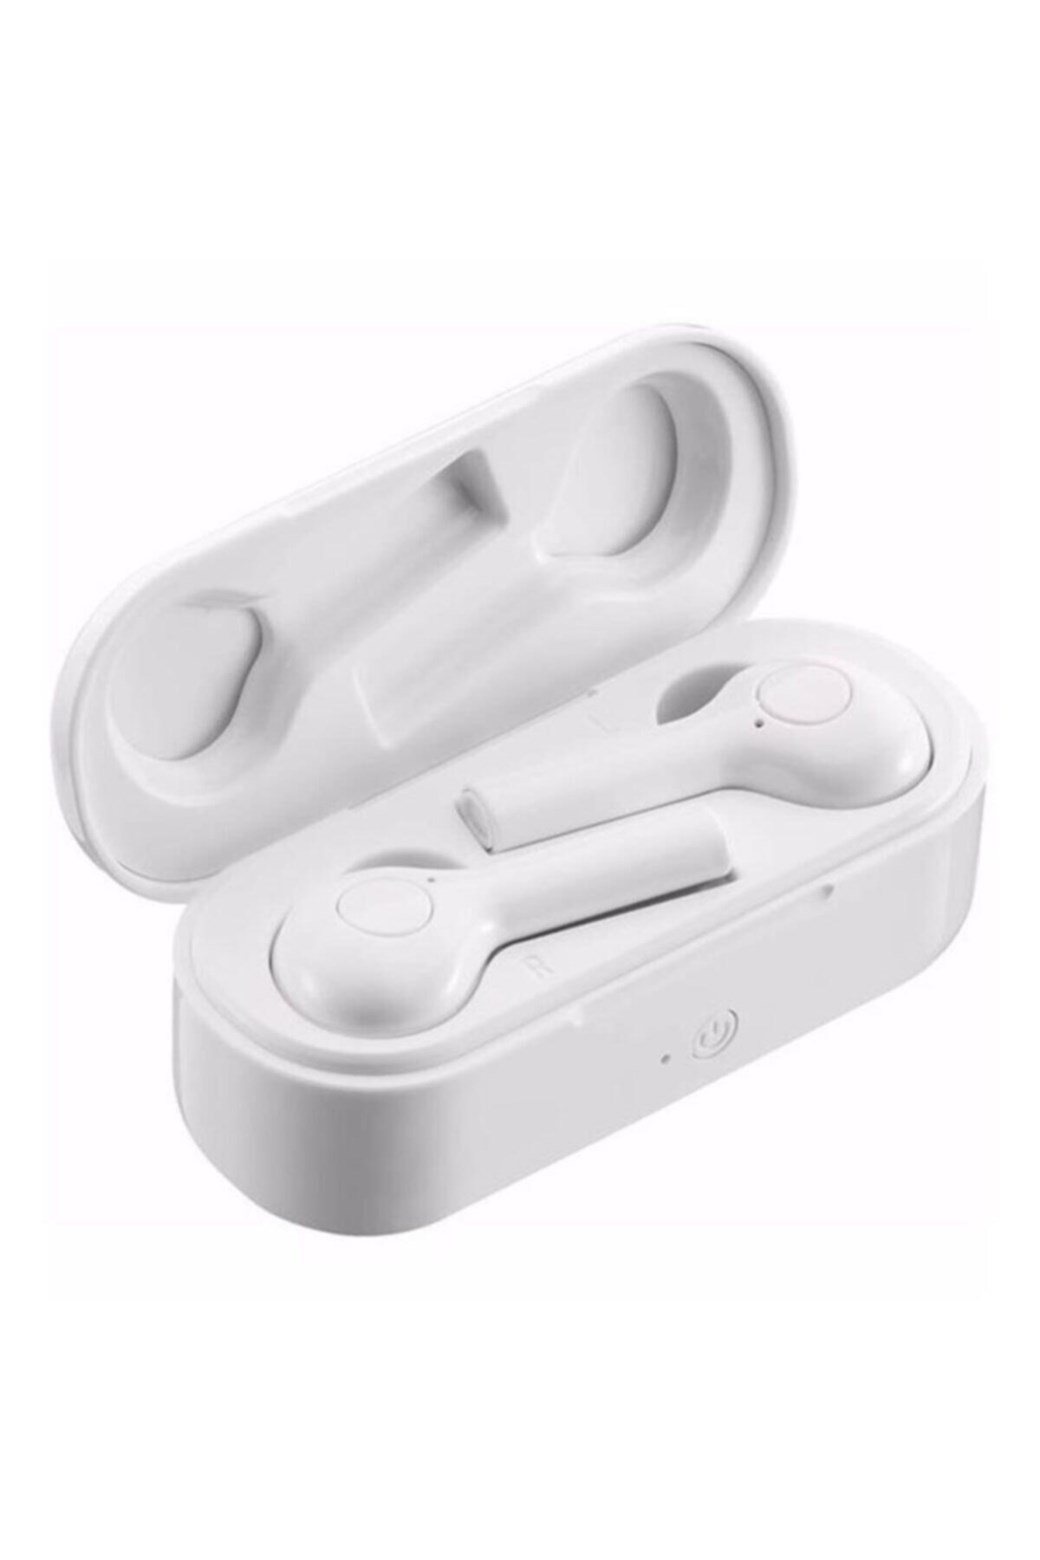 SYROX BLUETOOTH AIRPODS MX10